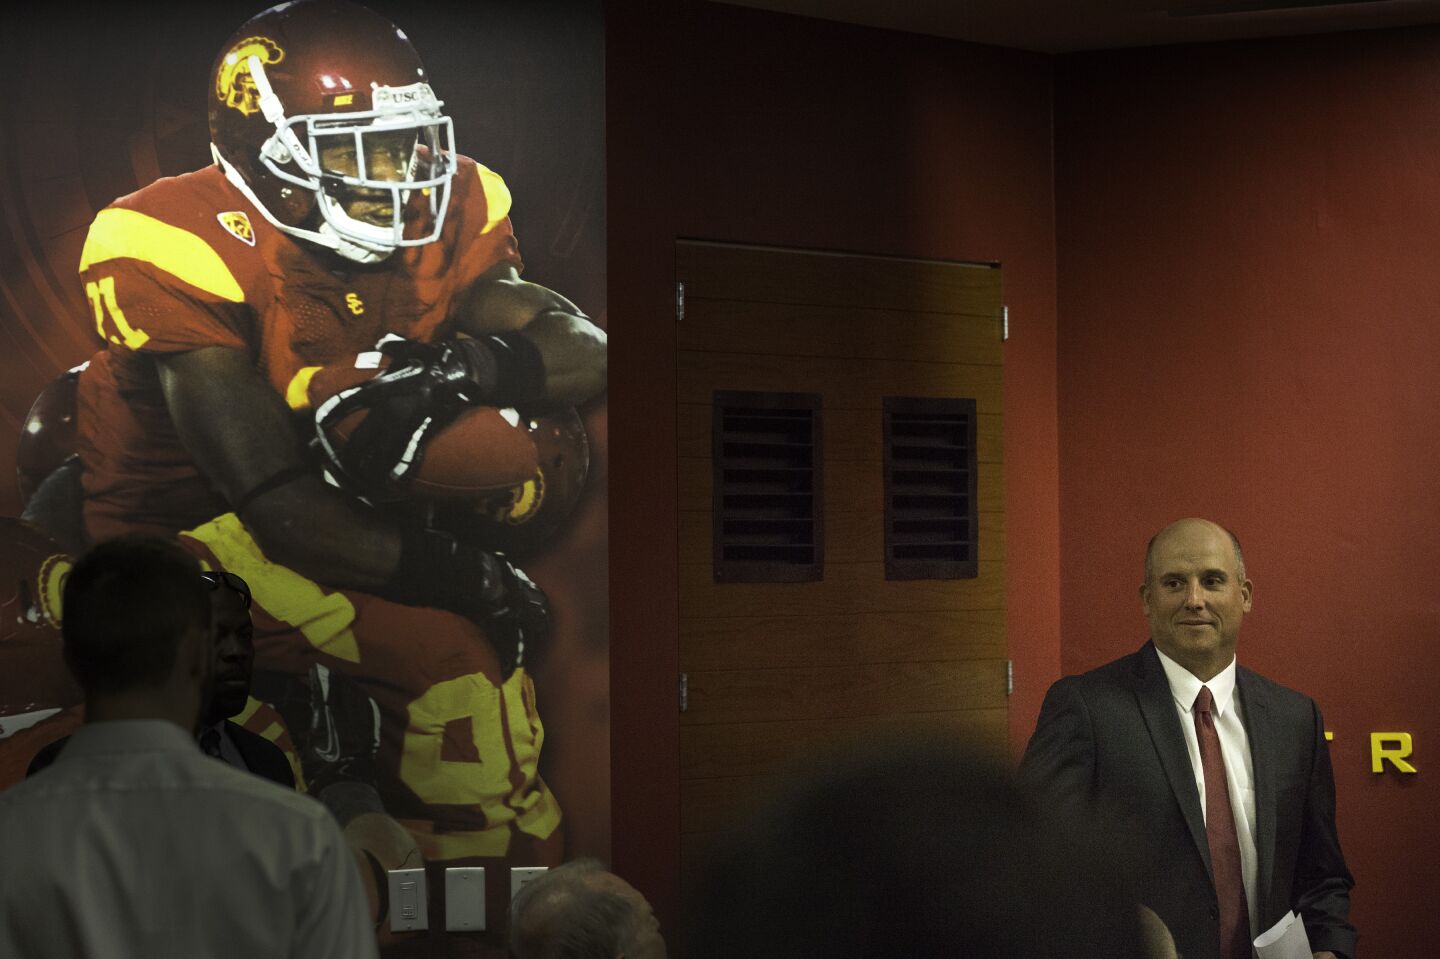 LOS ANGELES, CALIF. -- MONDAY, NOVEMBER 30, 2015: Clay Helton, right, waits to be introduced as the permanent head coach of USC football program during a press conference at the USC campus in Los Angeles, Calif., on Nov. 30, 2015.